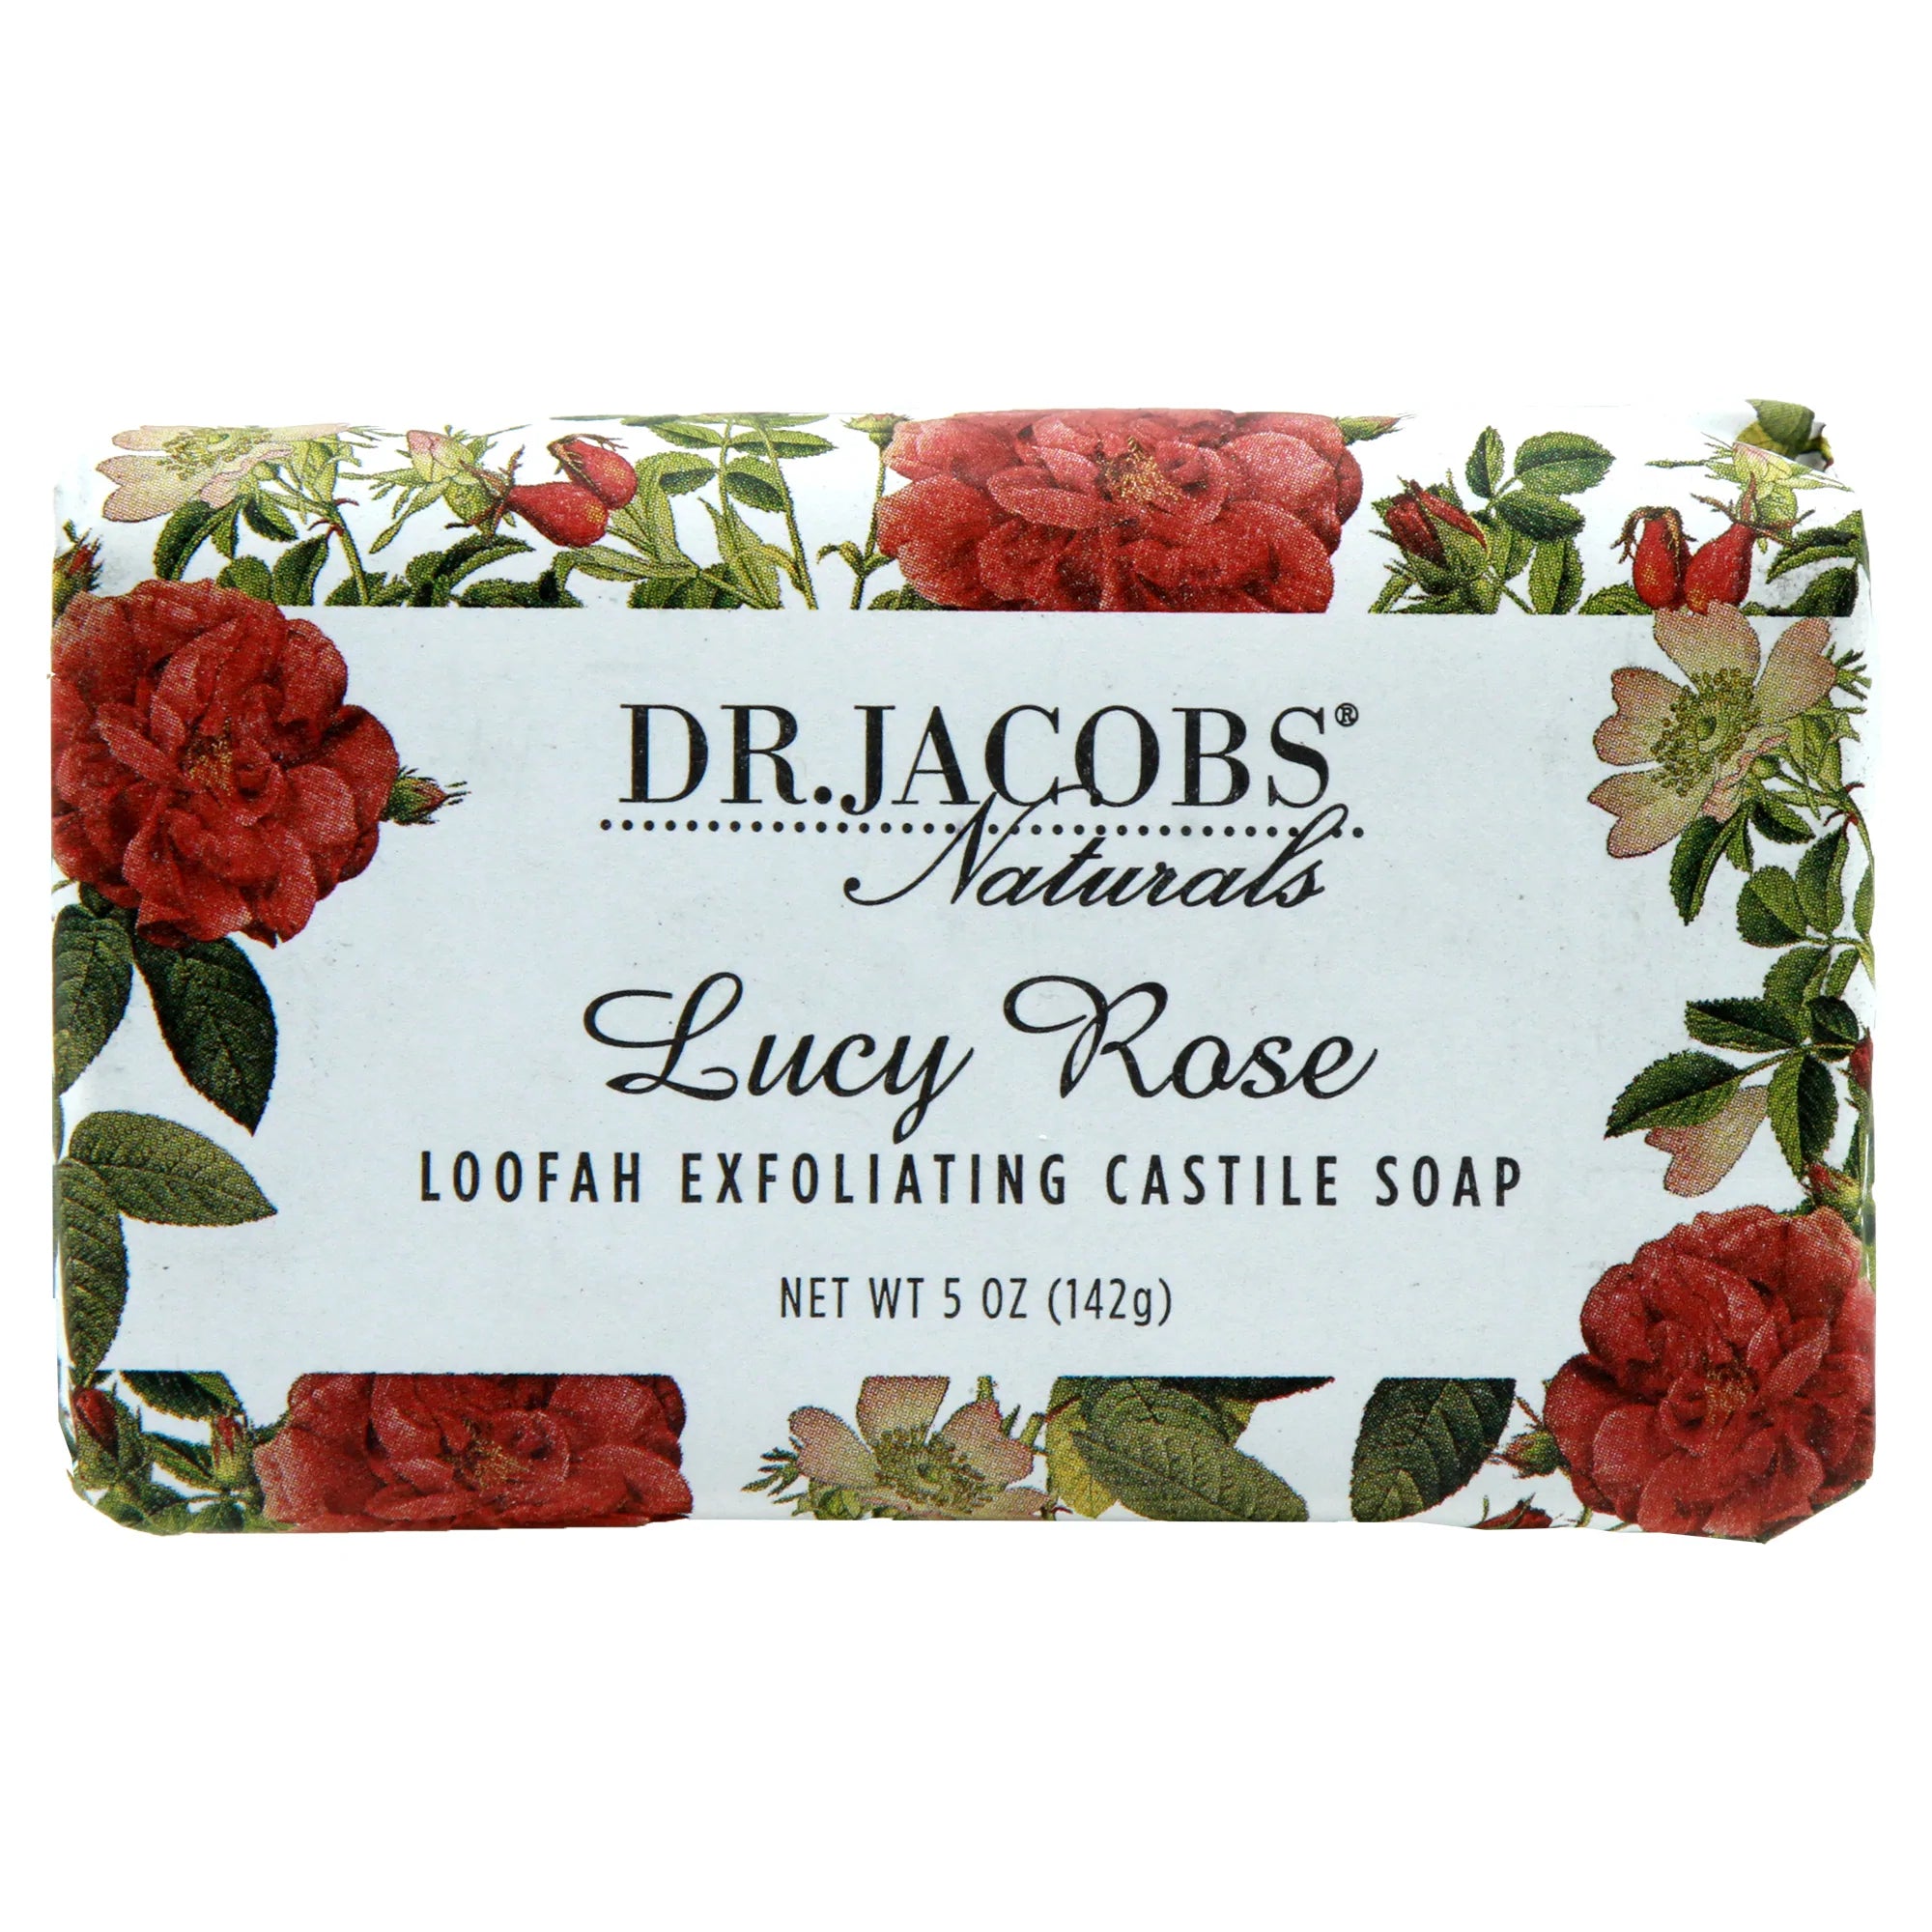  Lucy Rose by Dr. Jacobs Naturals Dr. Jacobs Naturals Perfumarie